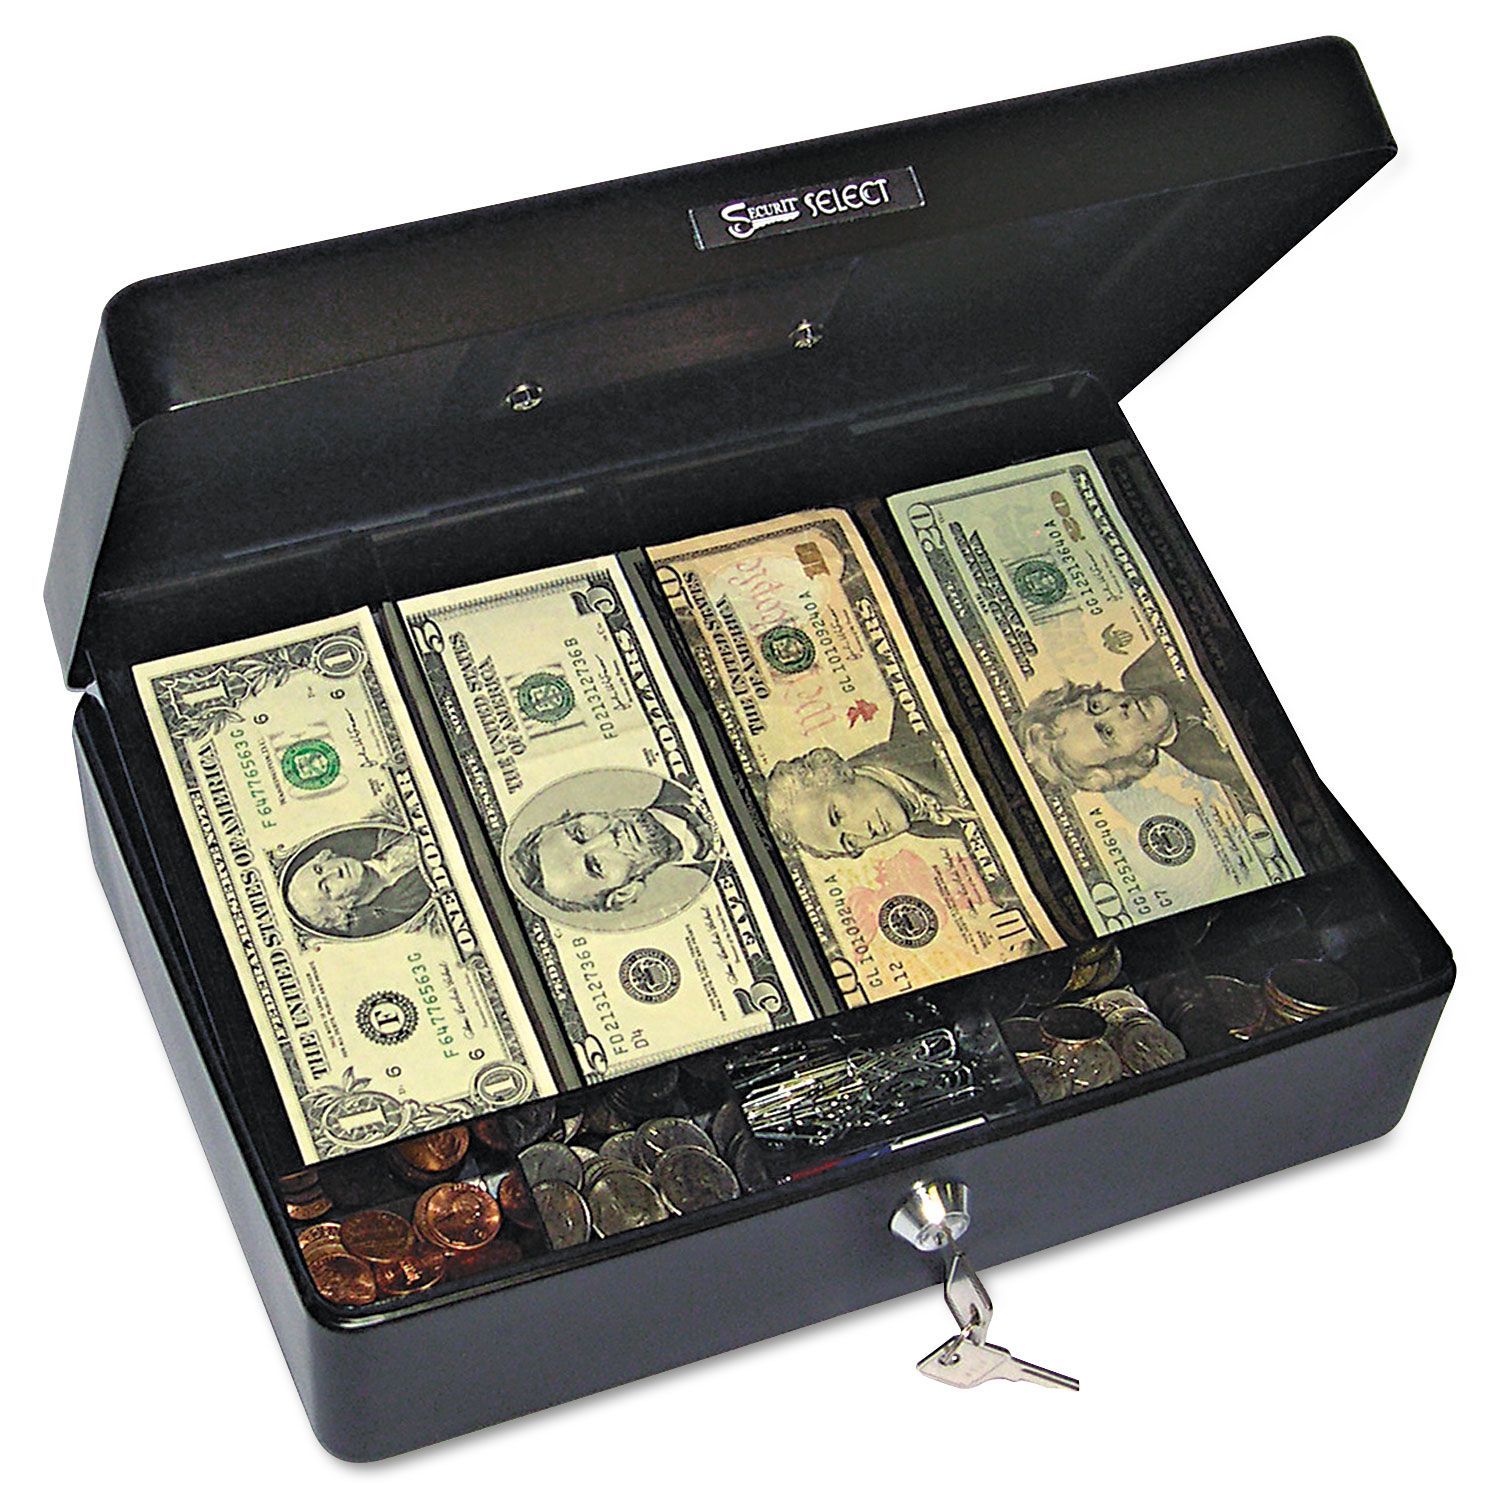  SecurIT PMC04804 Select Spacious Size Cash Box, 9-Compartment Tray, 2 Keys, Black w/Silver Handle (PMC04804) 